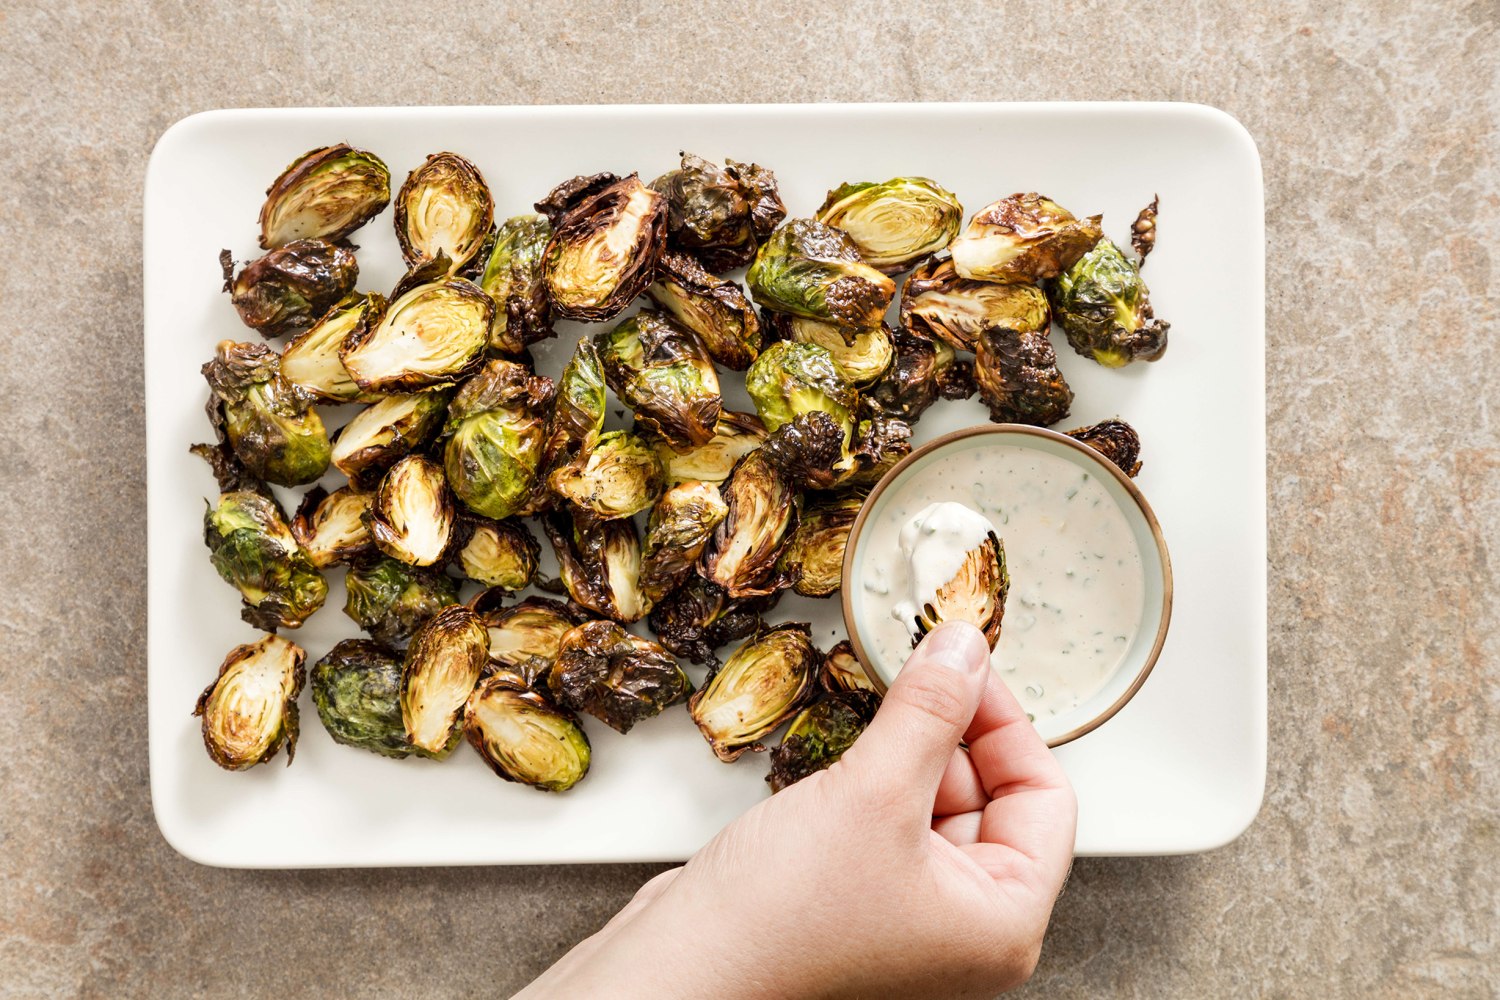 https://media-cldnry.s-nbcnews.com/image/upload/t_fit-1500w,f_auto,q_auto:best/newscms/2020_02/3180561/200110-roasted-brussels-sprouts-se01155a.jpg